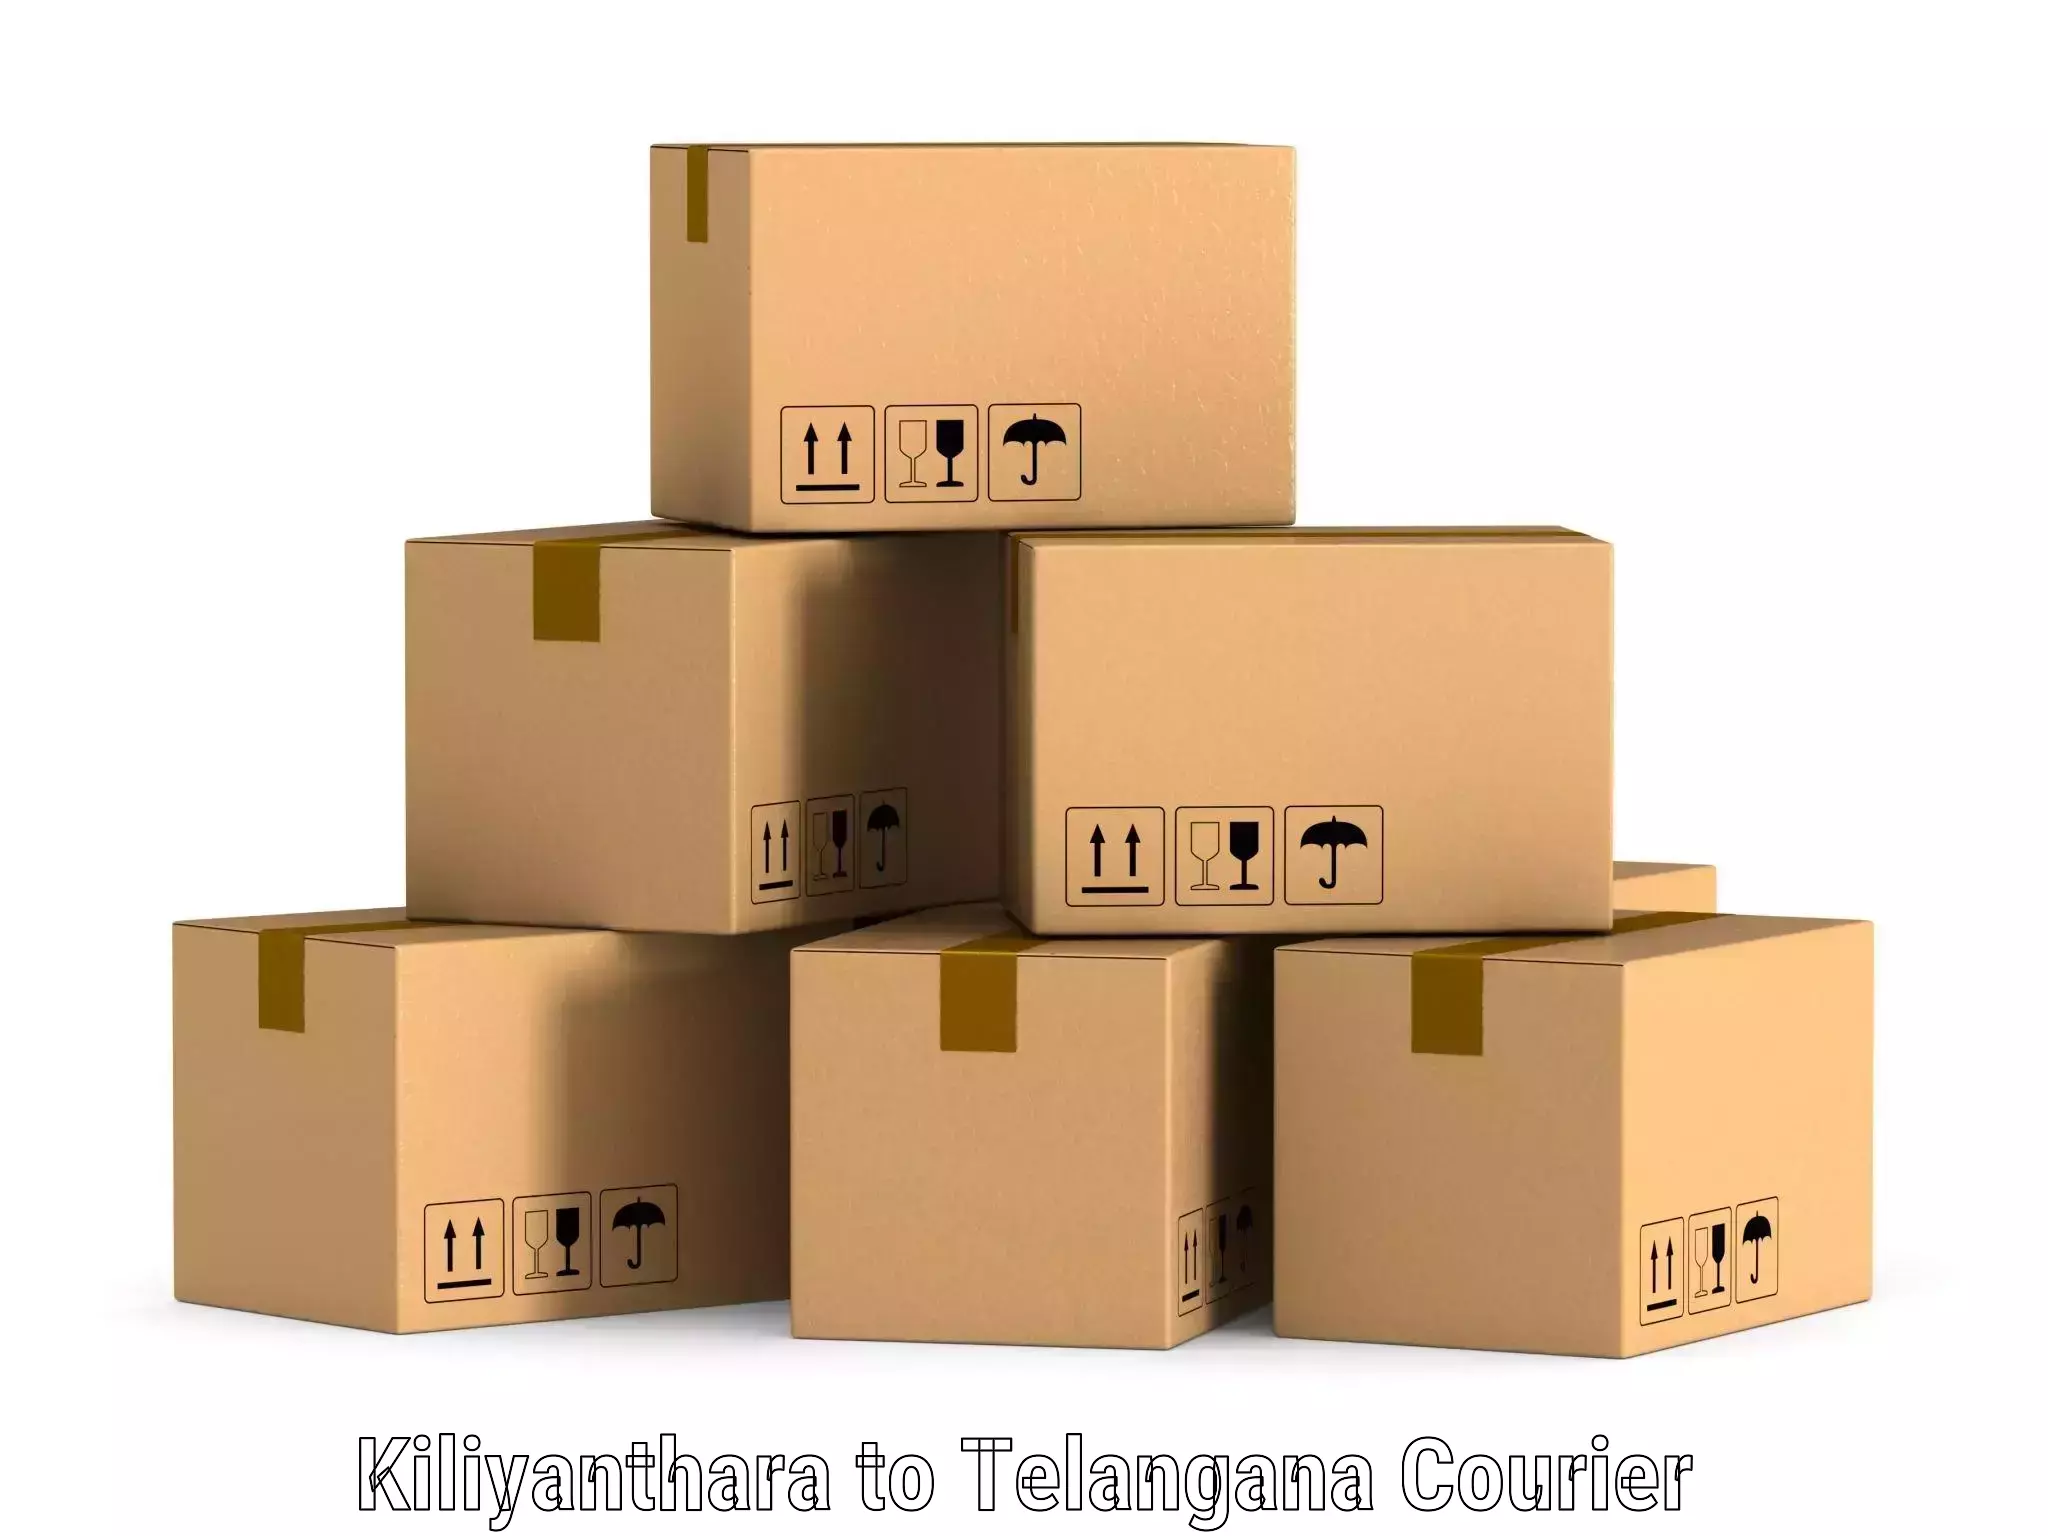 Express courier capabilities Kiliyanthara to Hyderabad